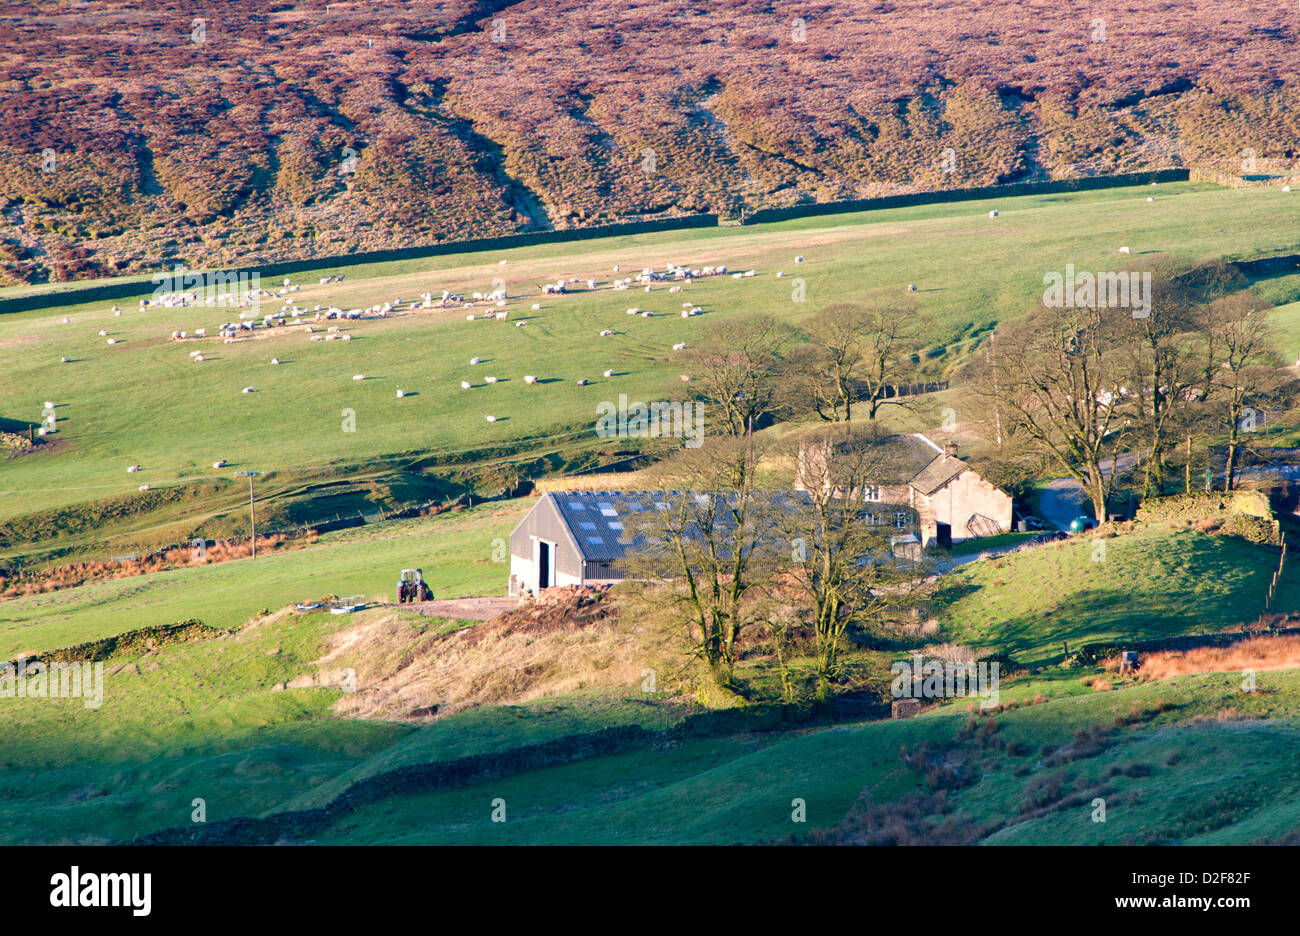 Sheep Farm on Cut Thorn Hill, backed by Axe Edge Moor, Peak District National Park, Cheshire, England, UK Stock Photo